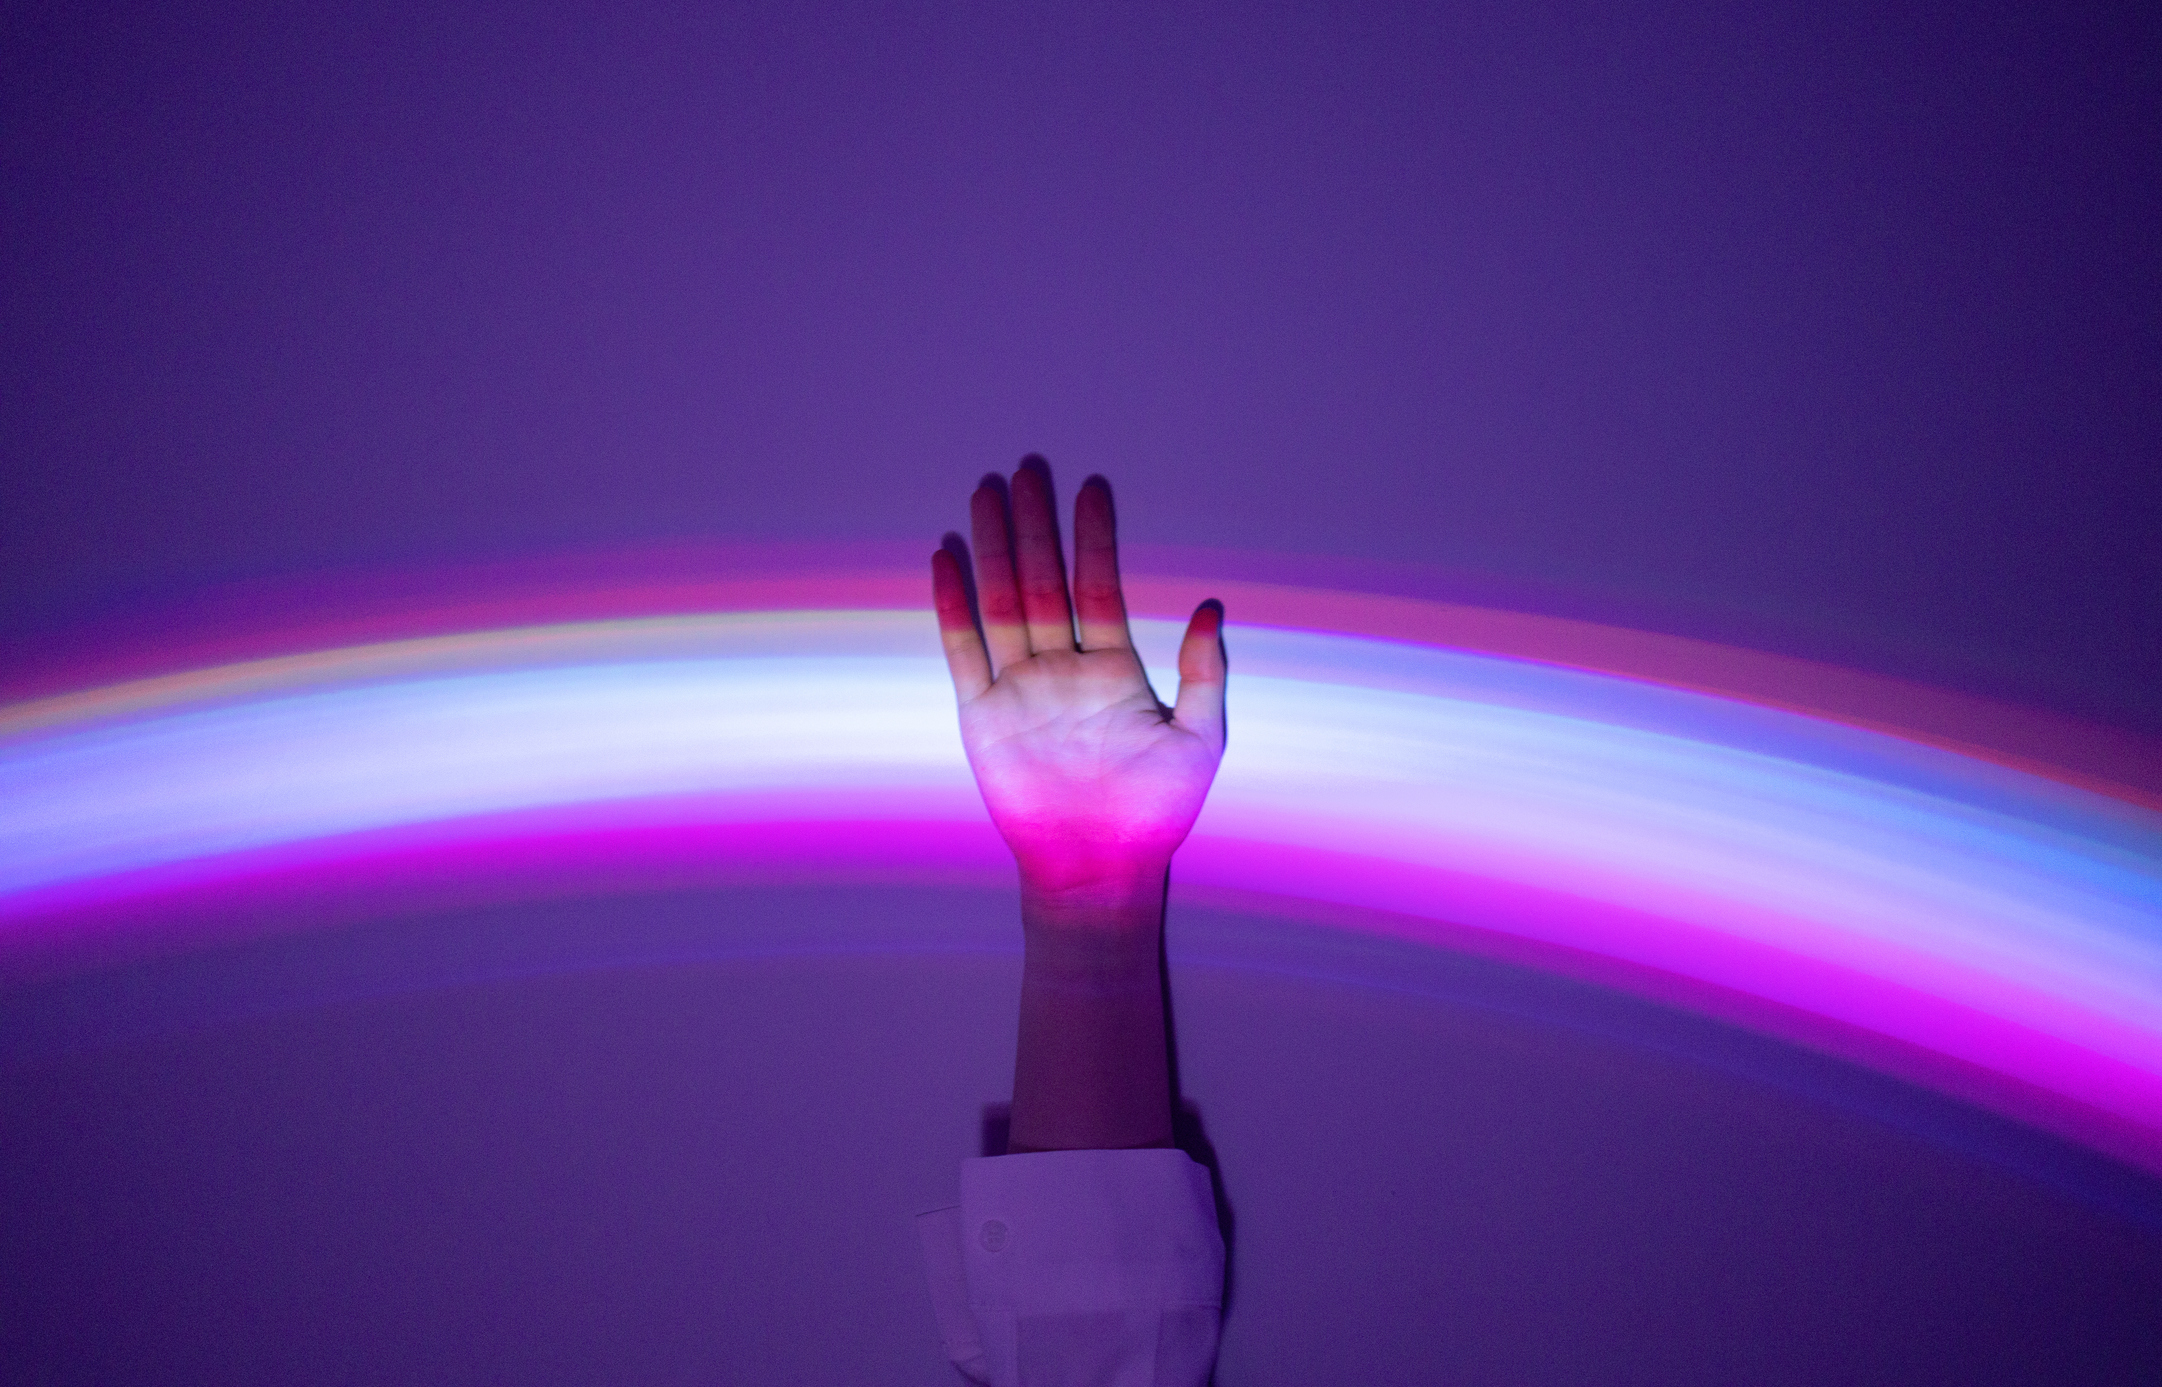 Hand intercepting a blurred light spectrum in a dark room, symbolizing connection or touch